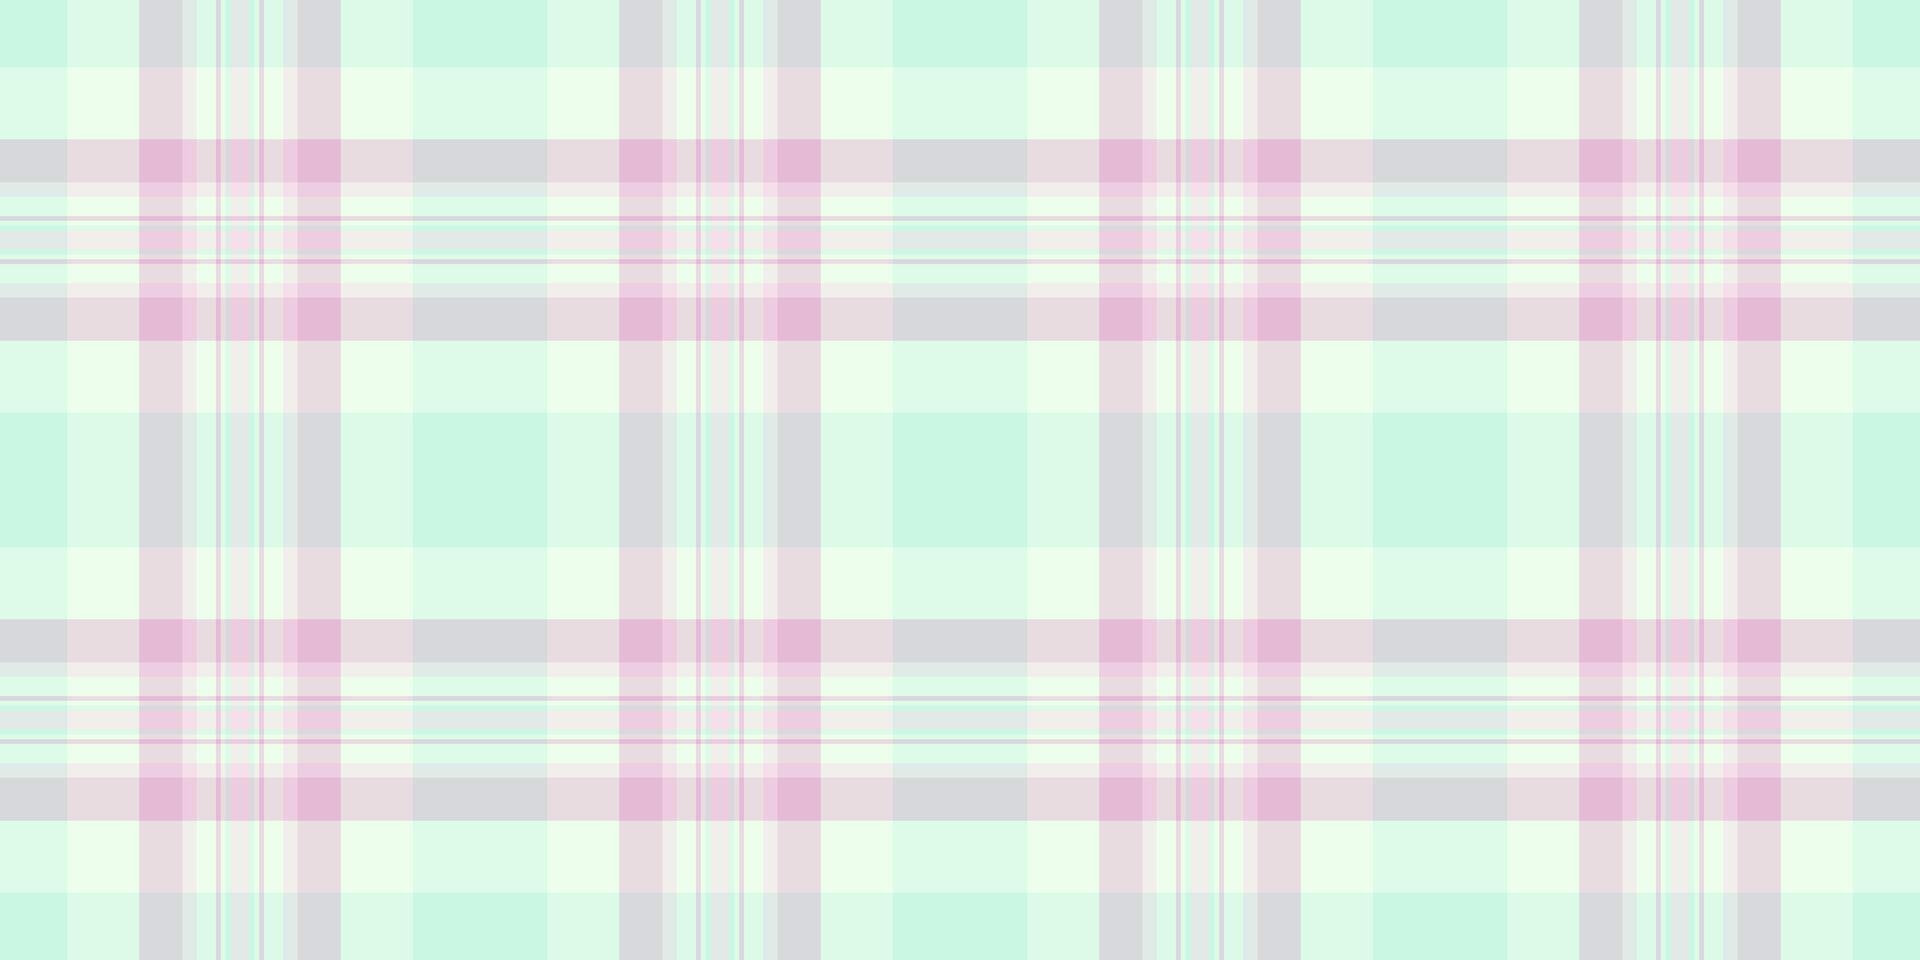 Glamor pattern fabric plaid, skill textile seamless tartan. Home texture background check in light and white colors. vector